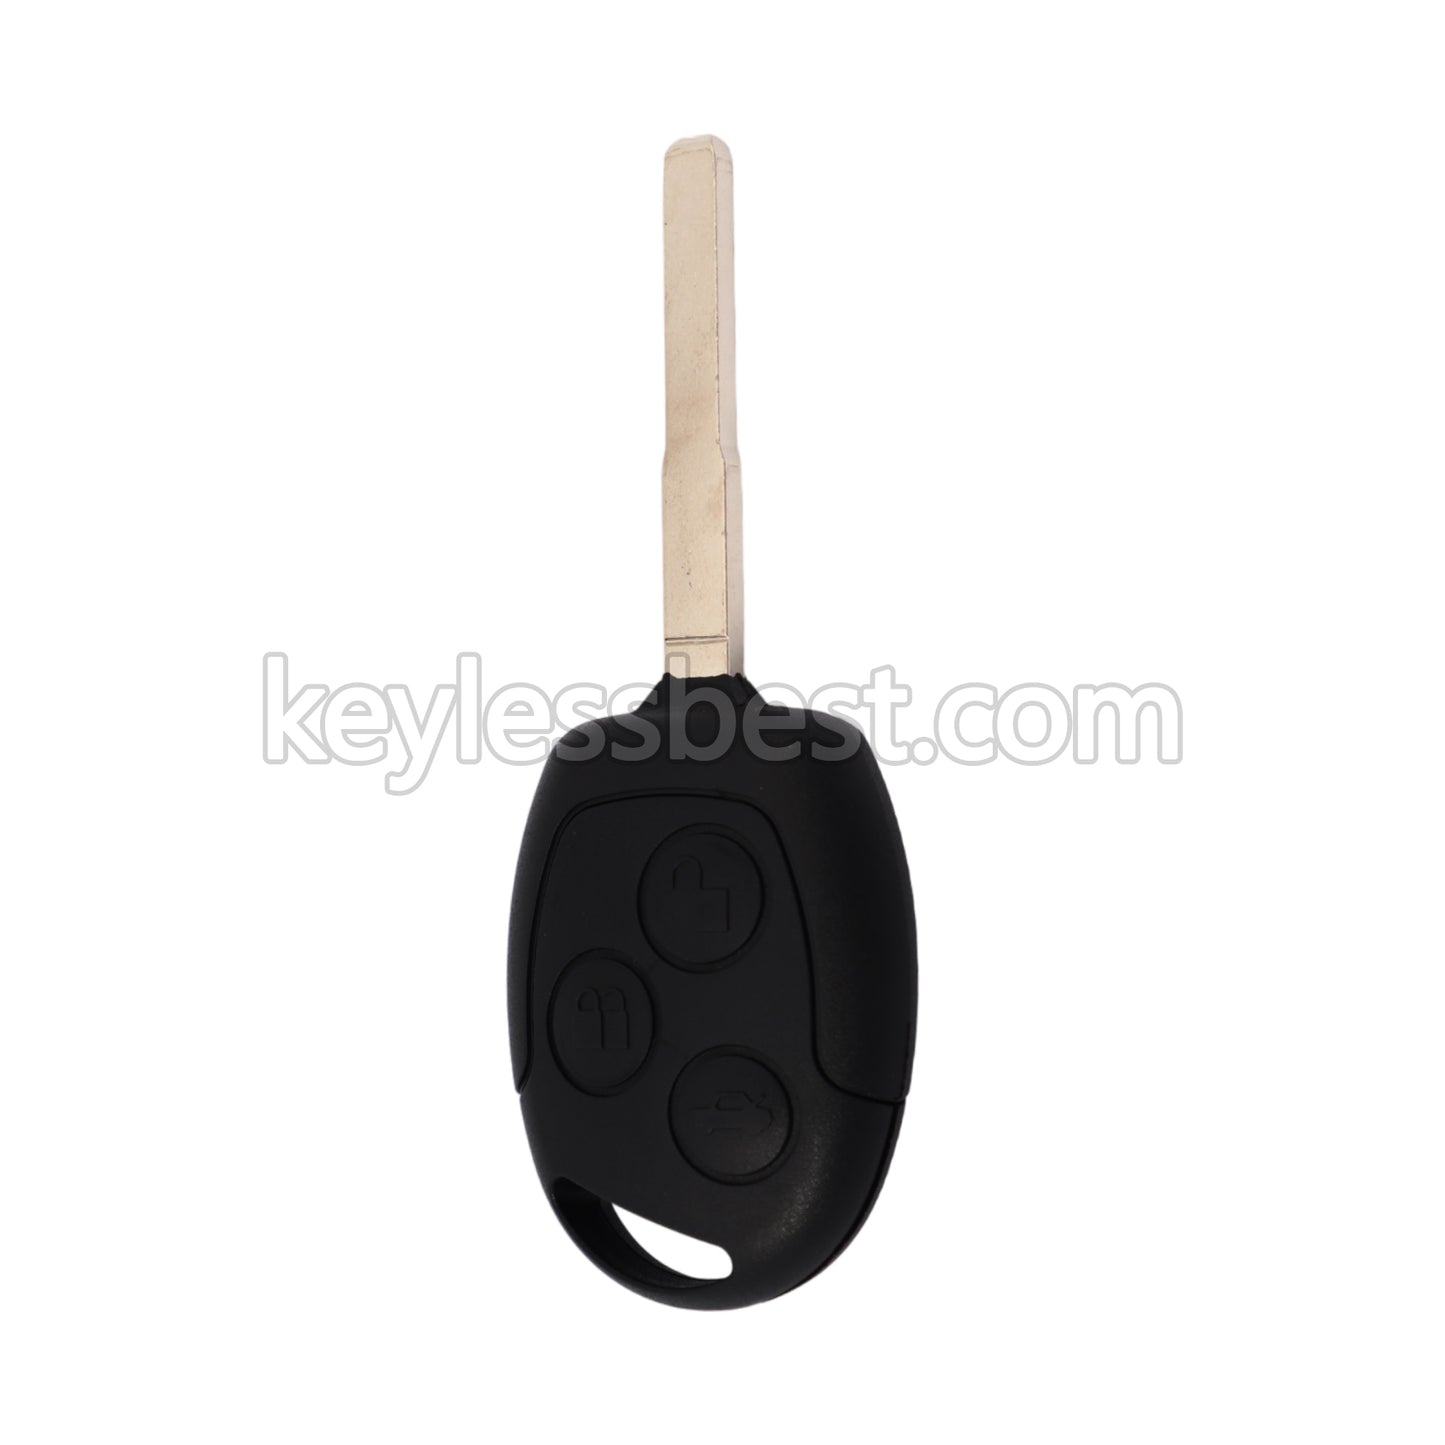 2011-2017 Ford Fiesta / 3 Buttons Remote Key / KR55WK47899 / 315MHz